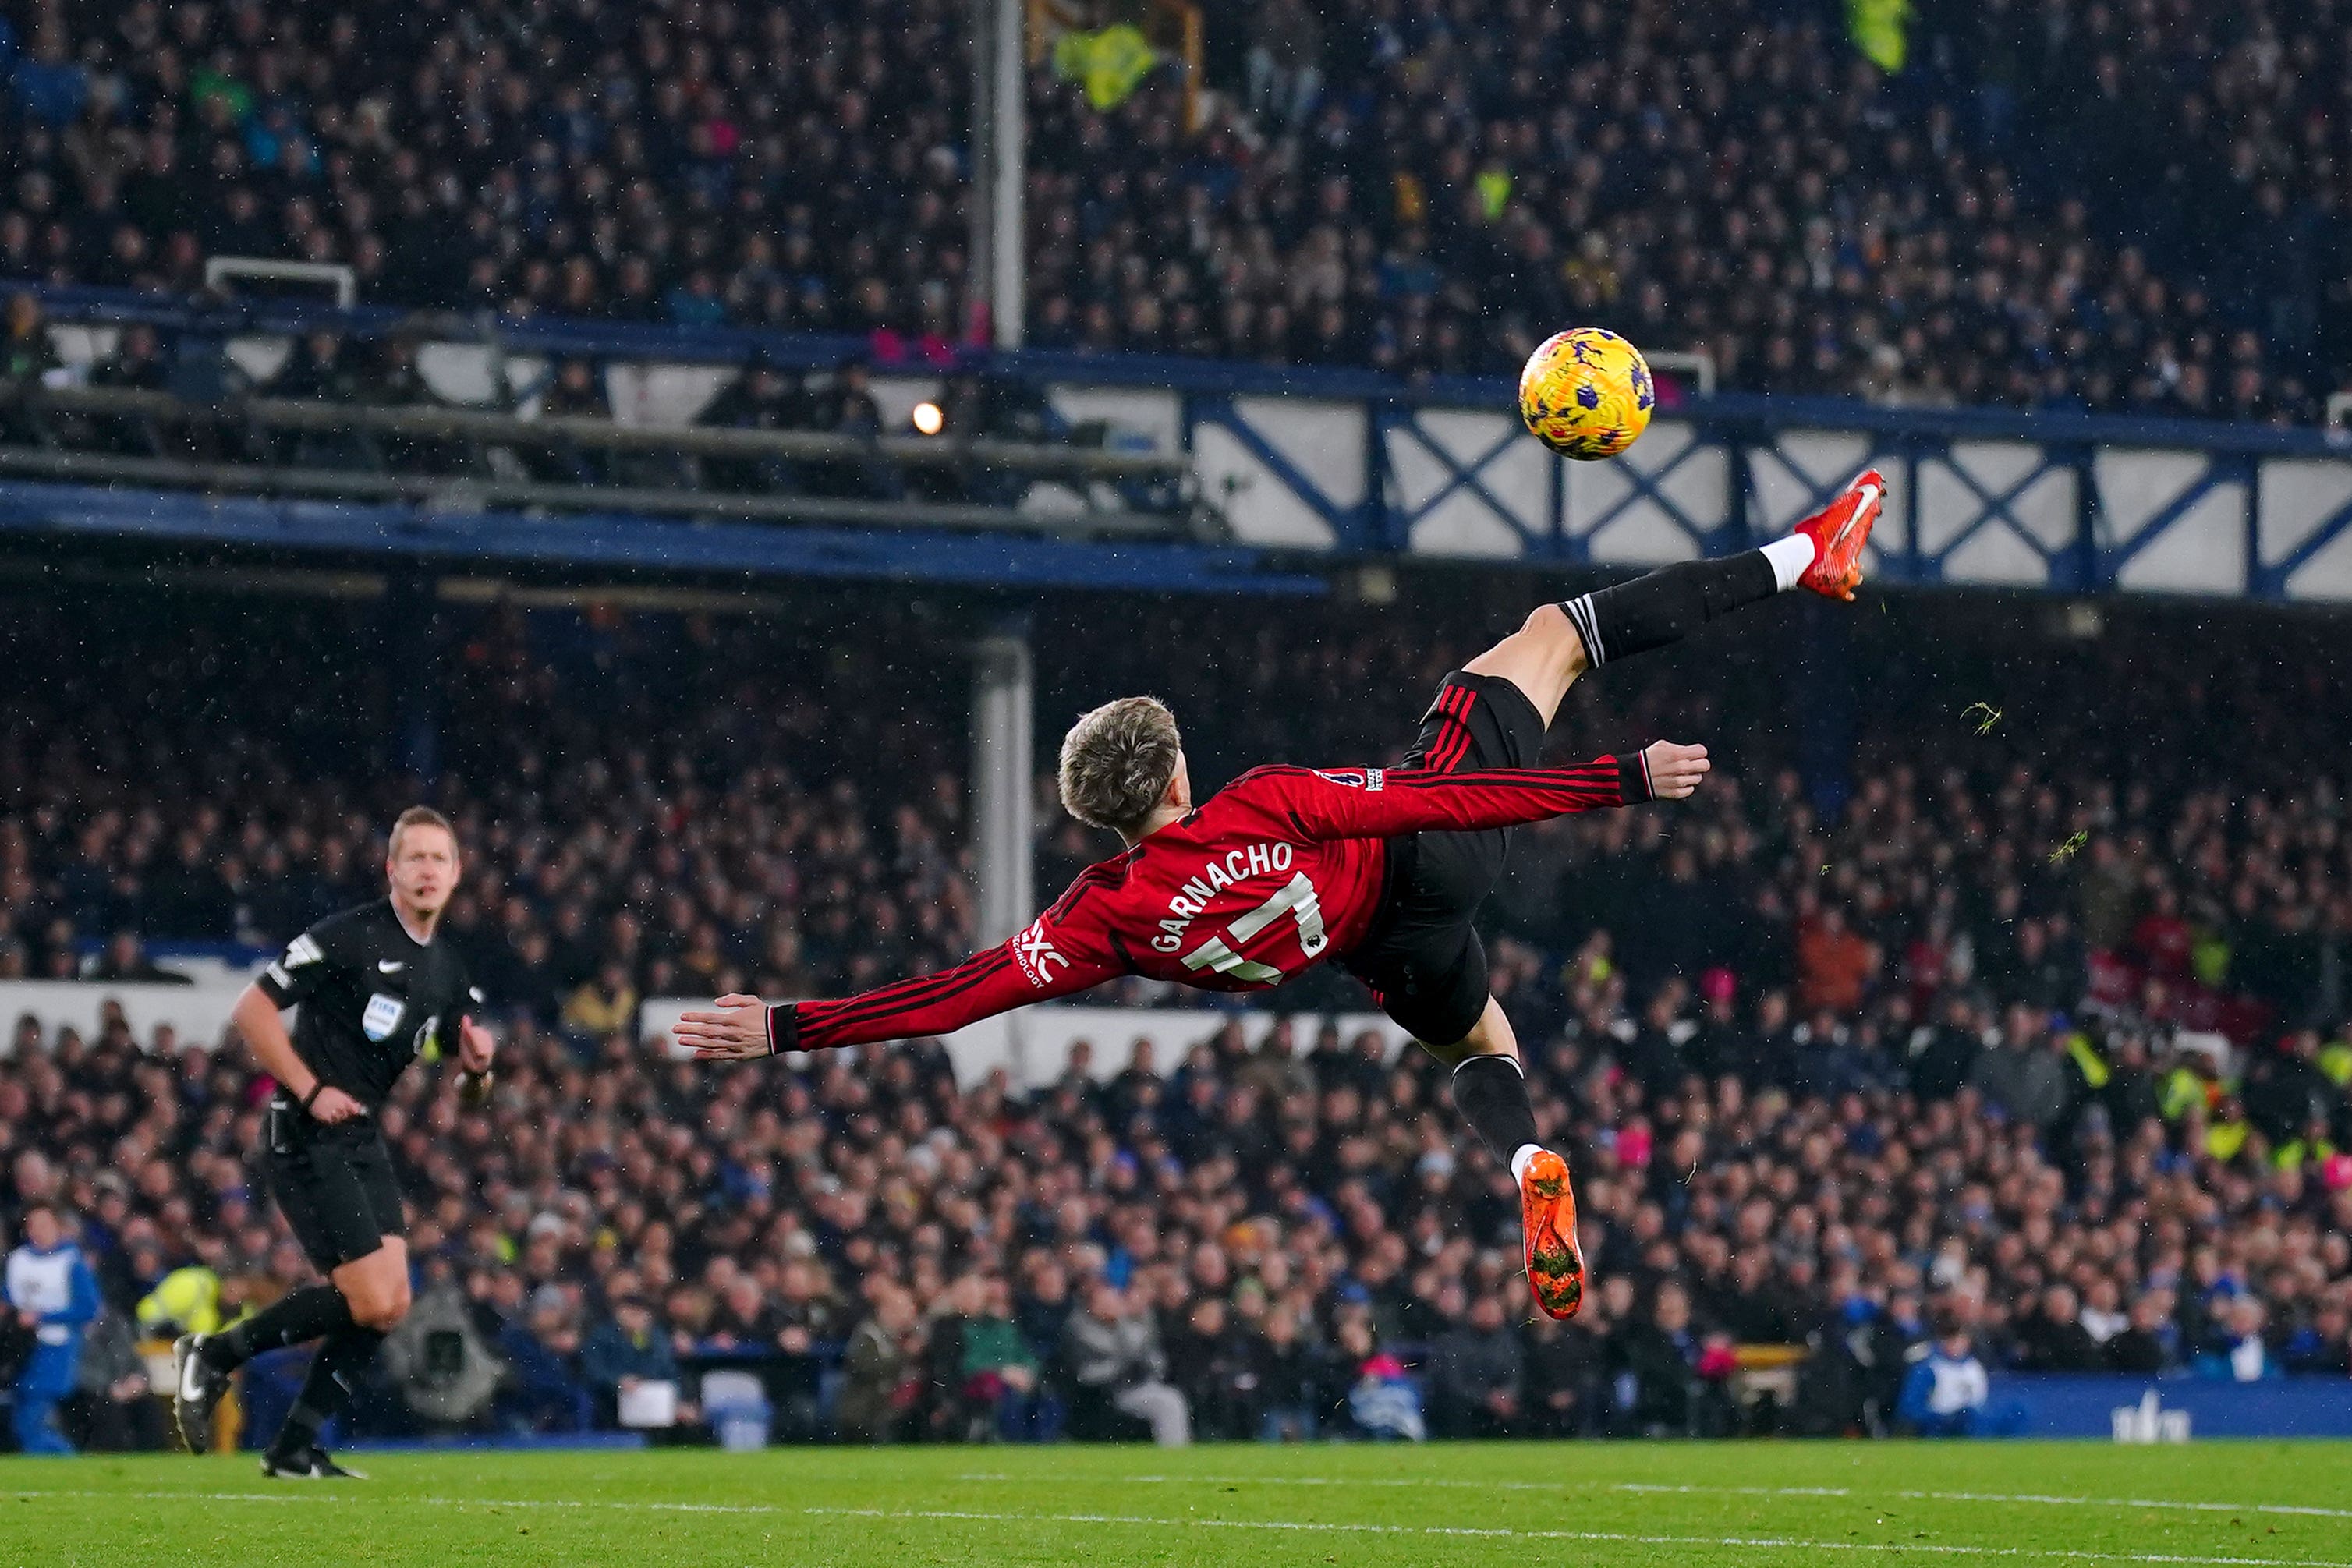 Garnacho takes flight to give United the lead at Goodison